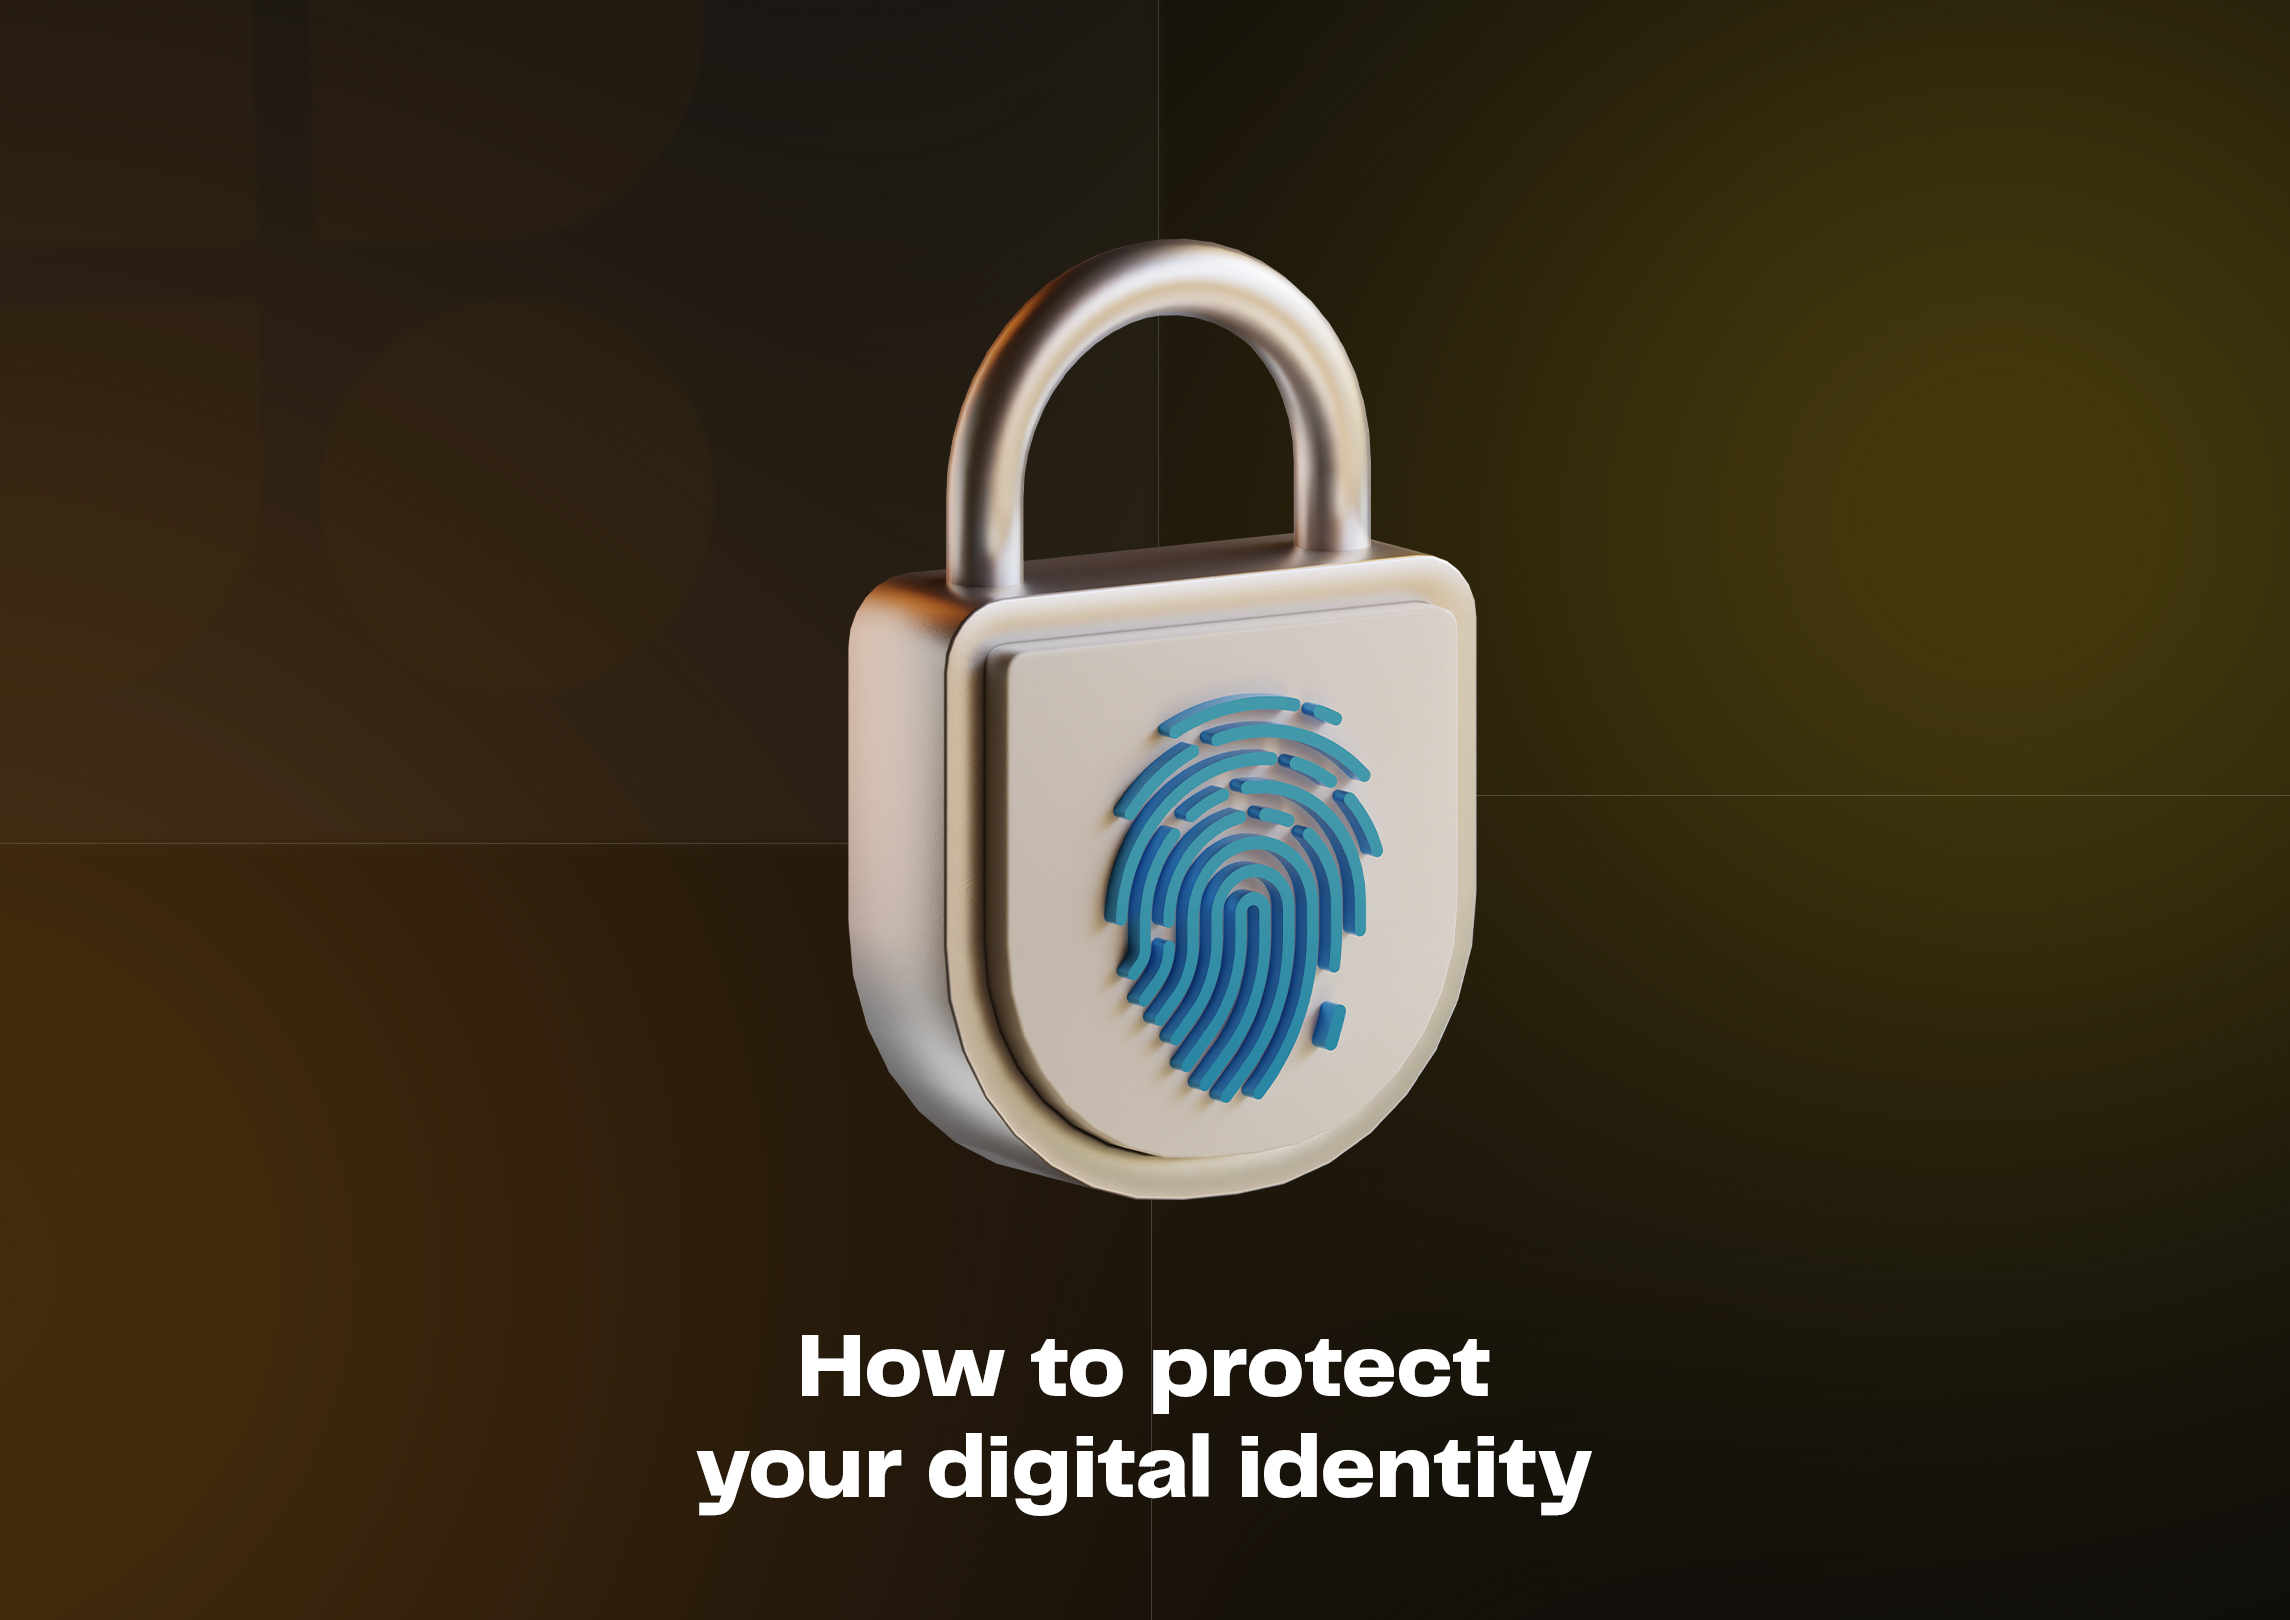 Address Poisoning: Protecting Your Digital Identity – What You Should Know